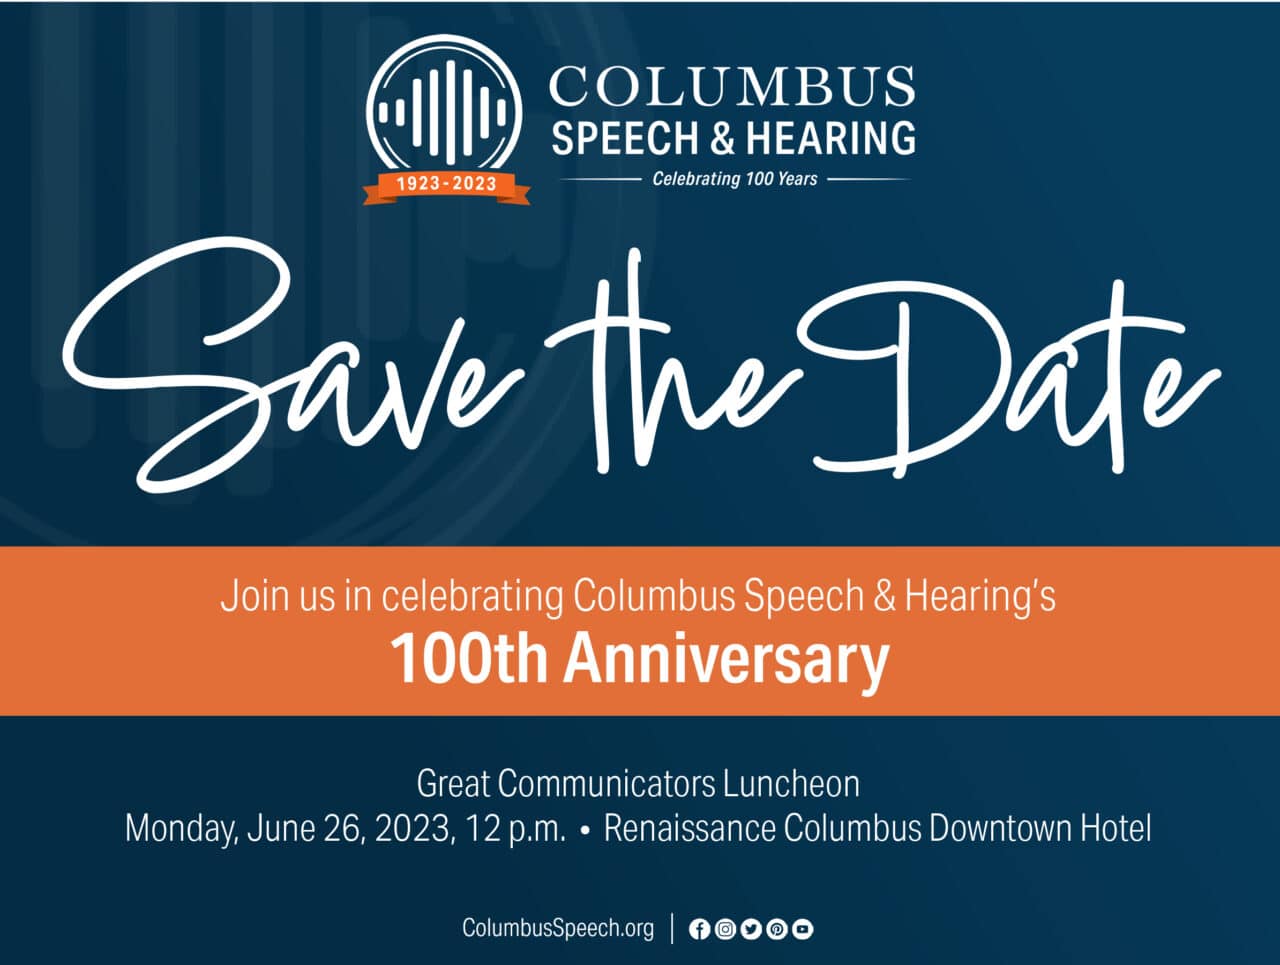 Save the date for the great communicators luncheon